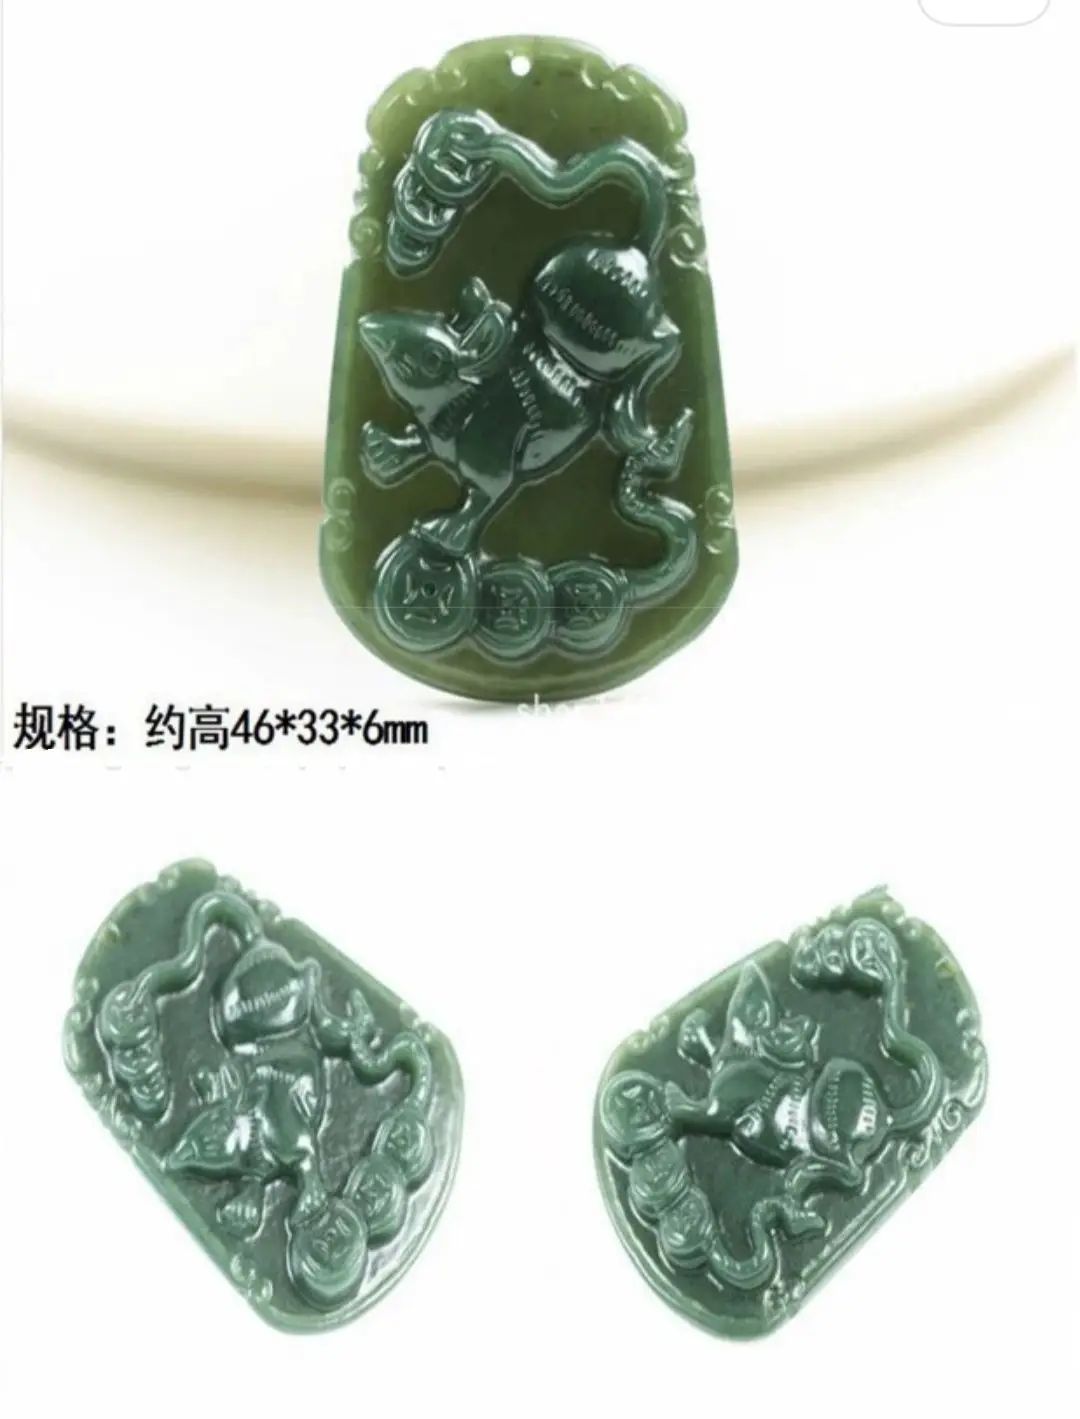 

Nature Bottle Green Jade Tiger Pendant Amulet Hanging Chinese Zodiac Years Person Mascot Fine